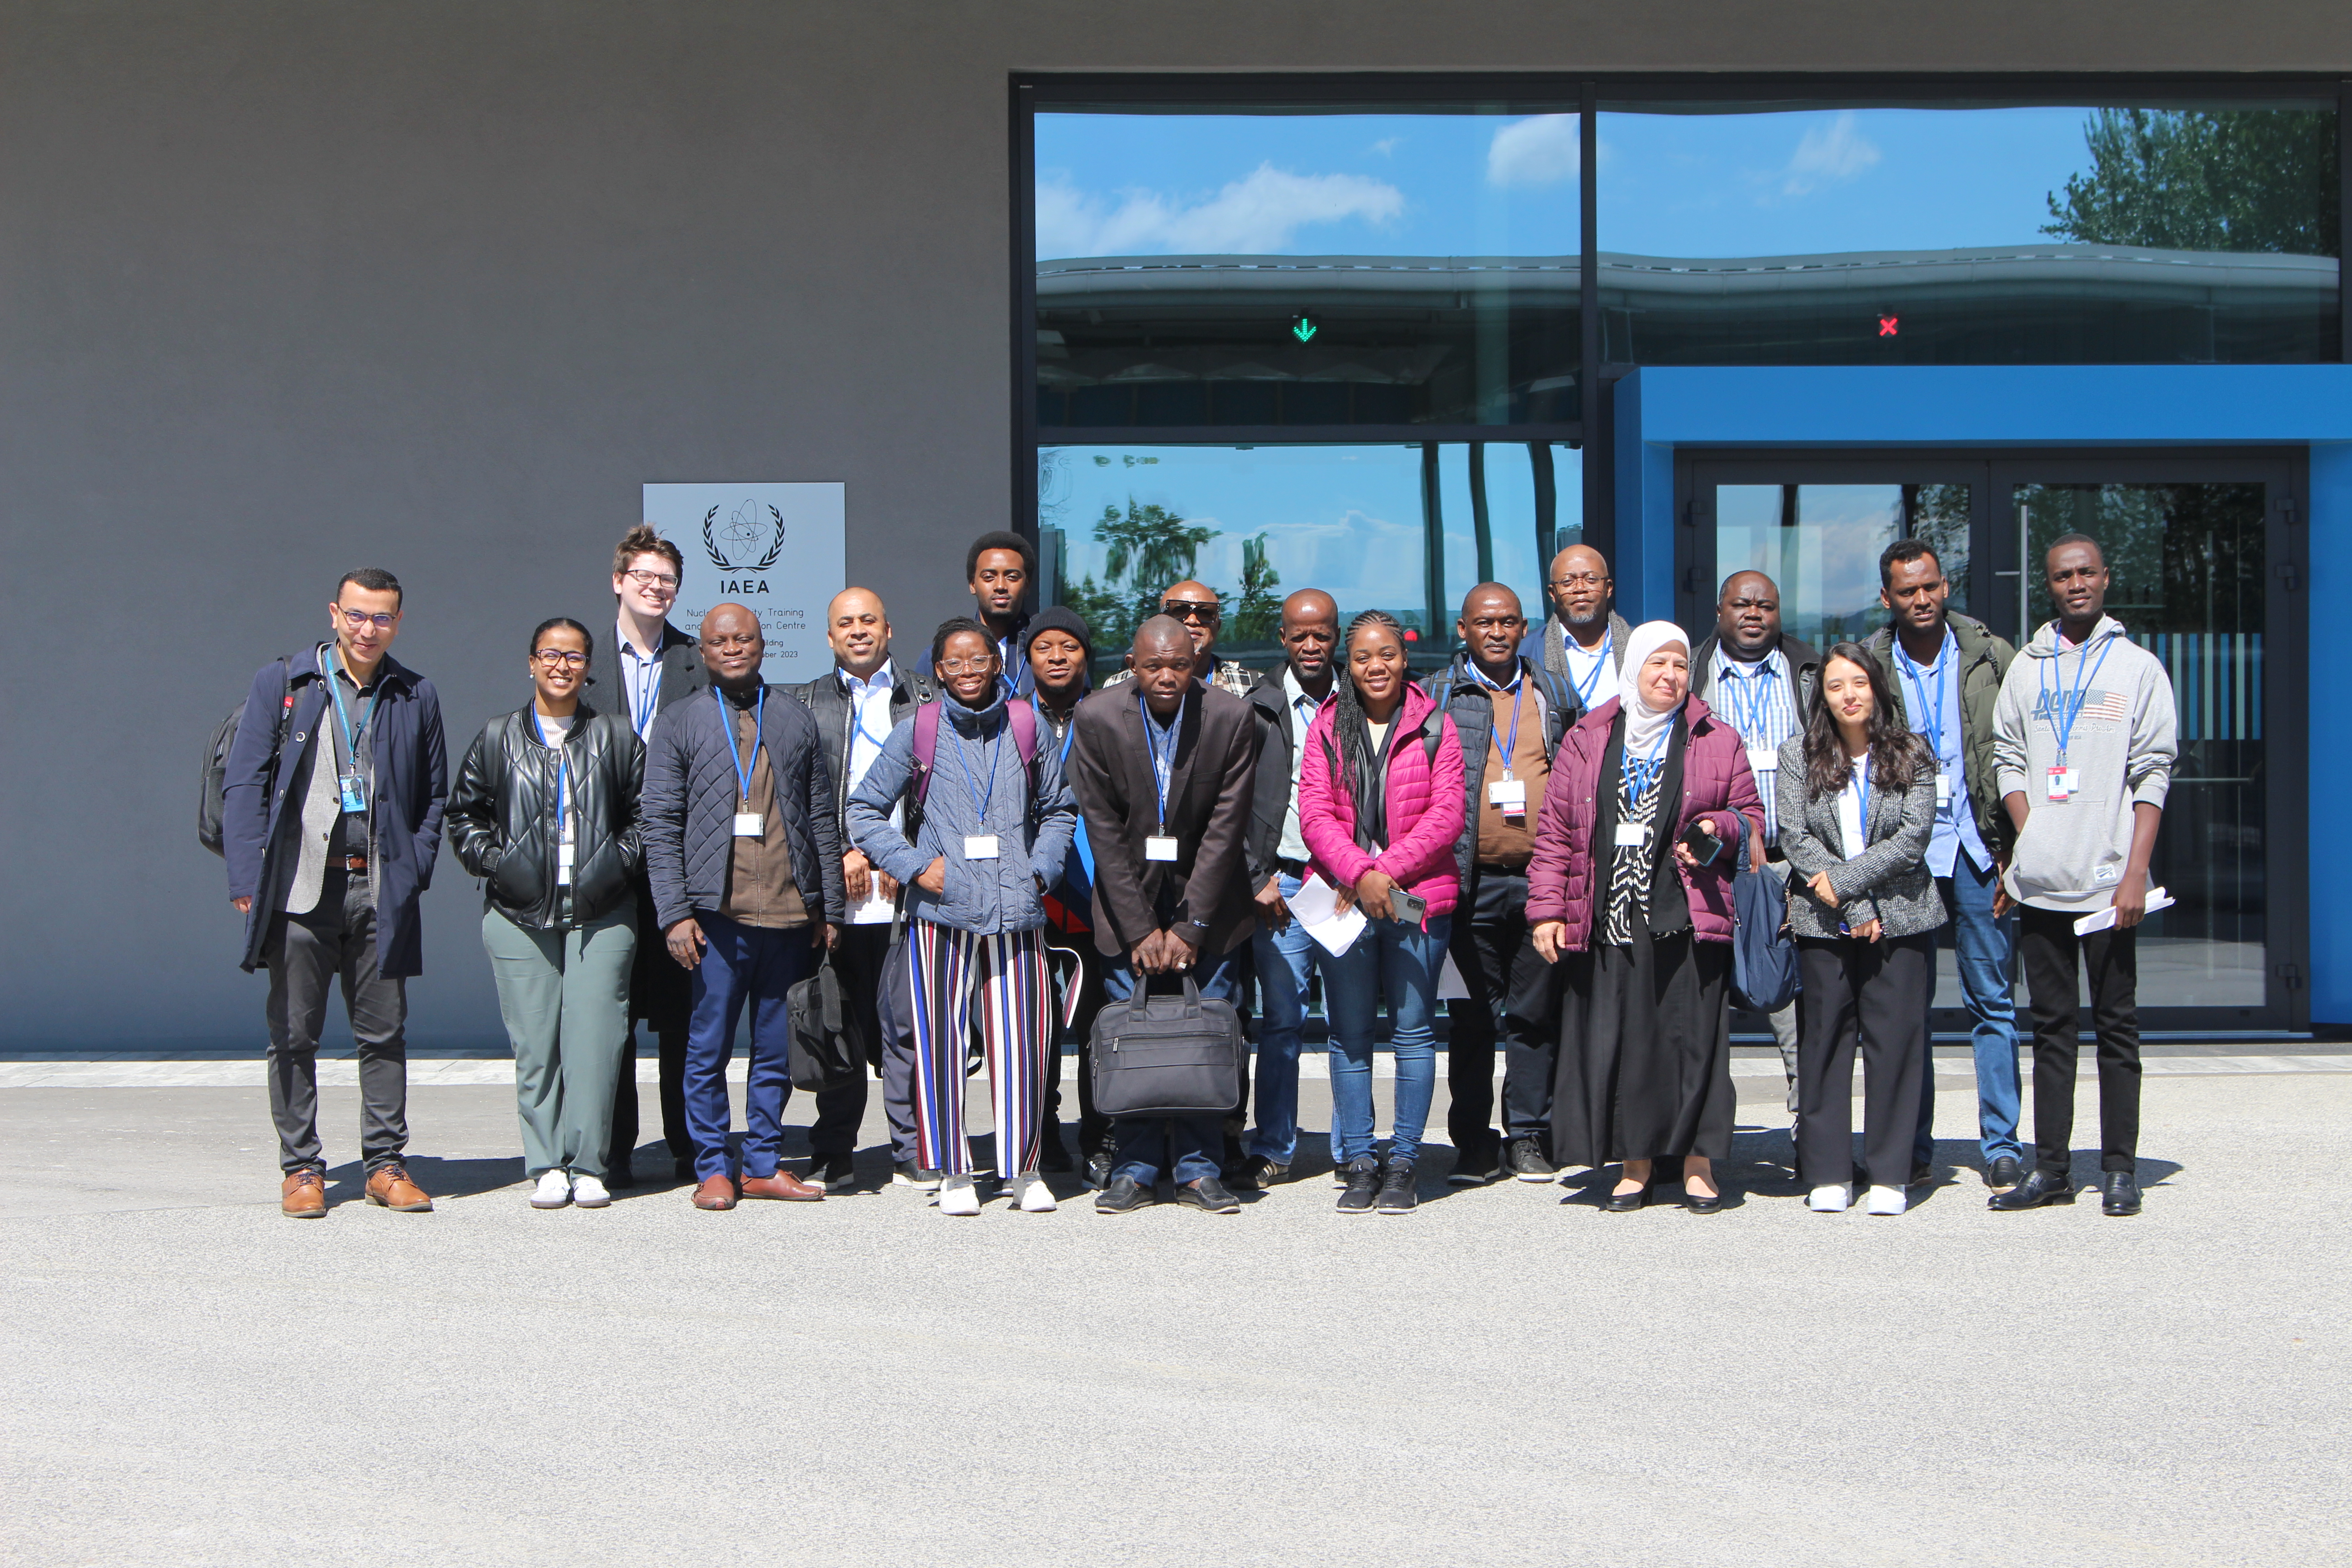 Workshop participants during their visit to IAEA Nuclear Applications Laboratories in Seibersdorf.